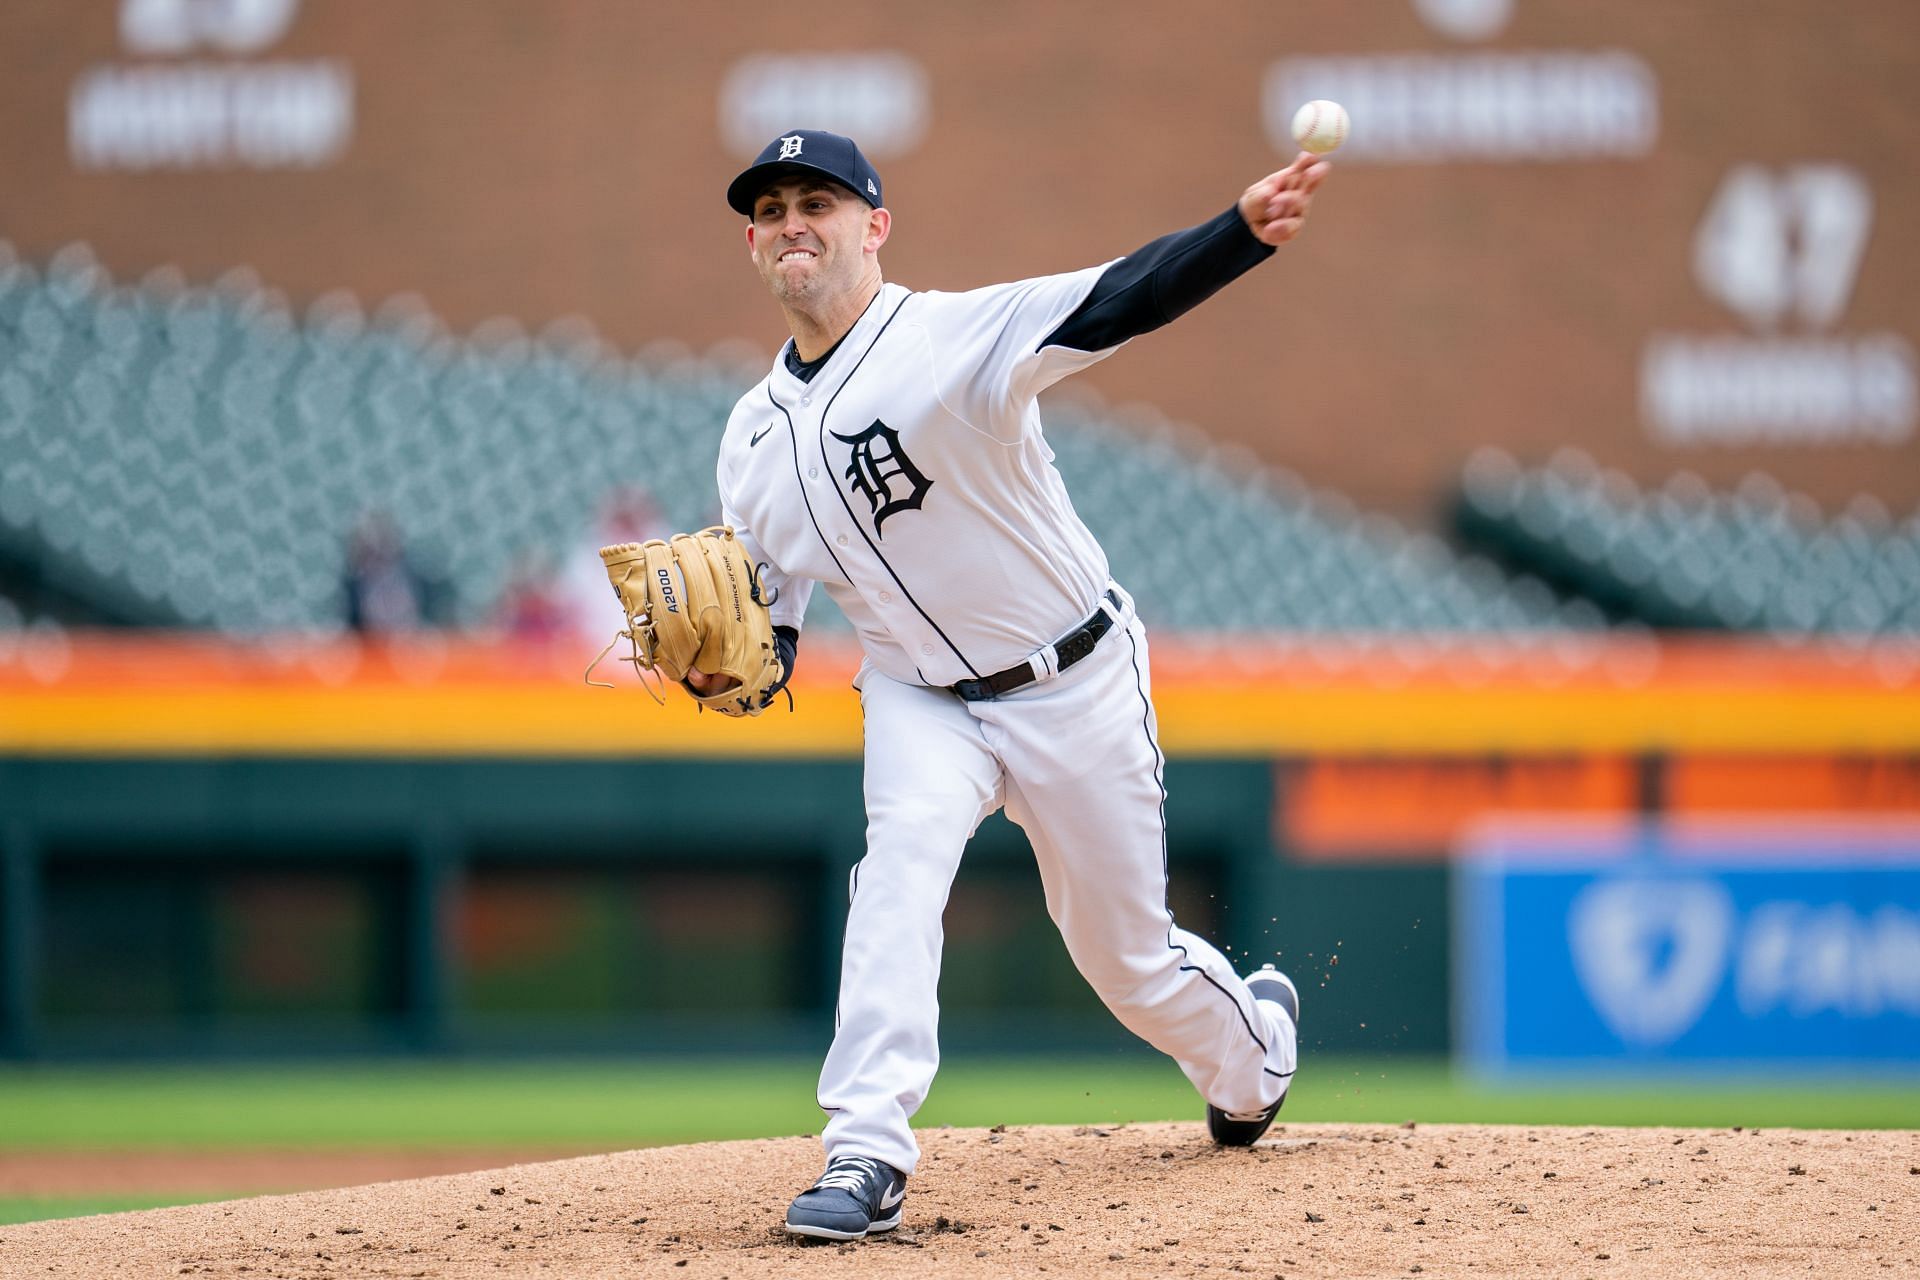 MLB fans shocked by low attendance numbers during game between Cleveland Guardians and Detroit Tigers